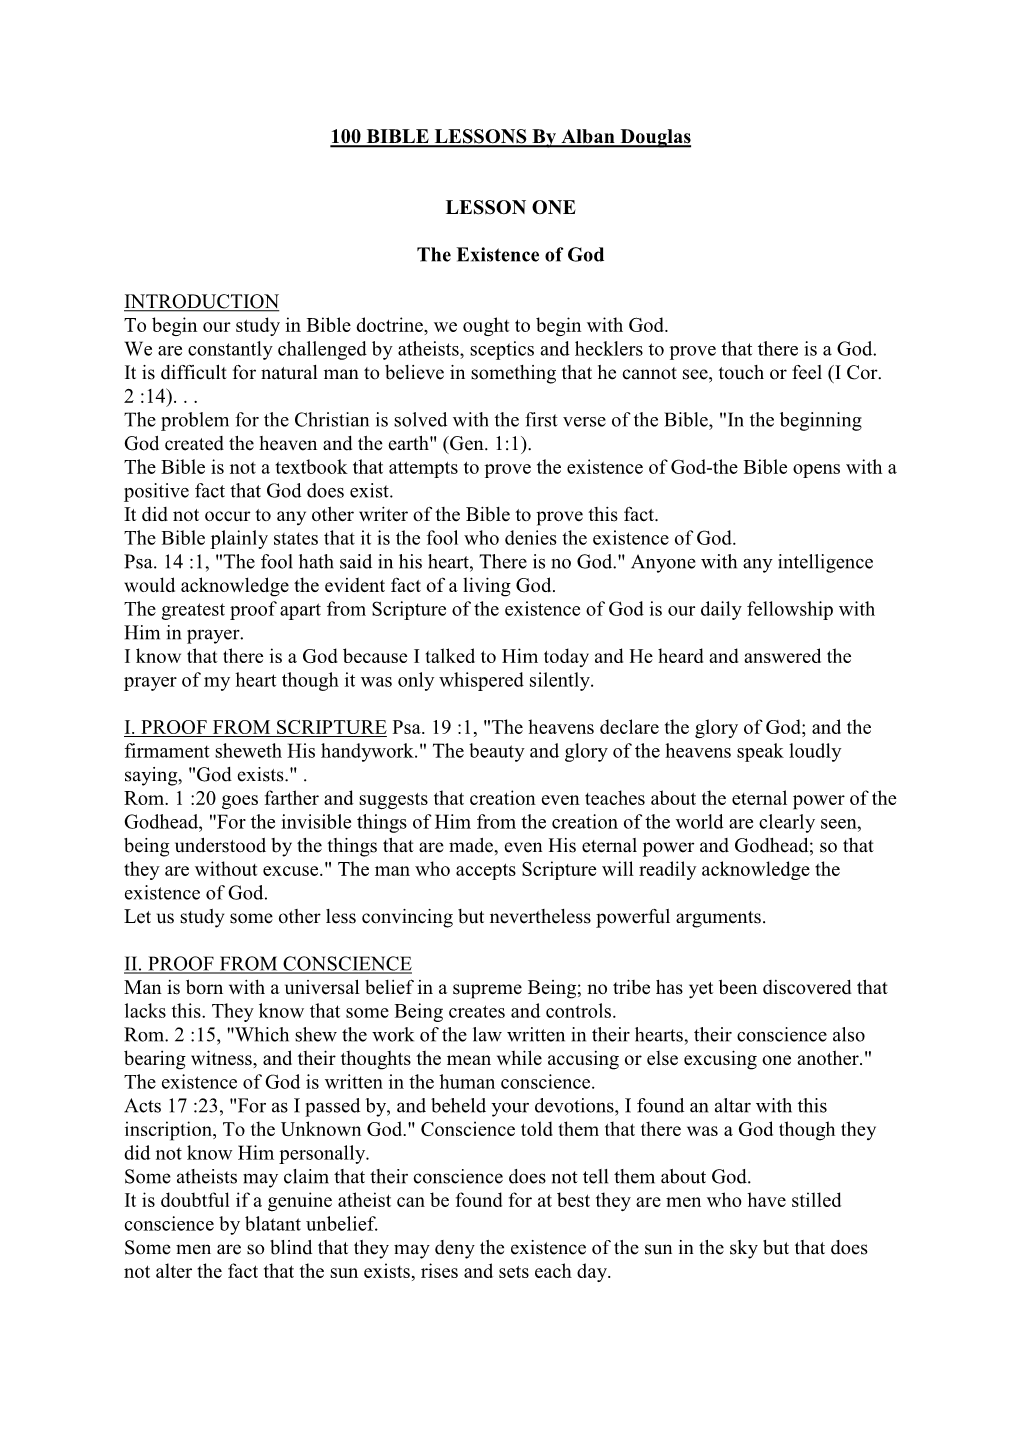 100 Bible Lessons About God the Father